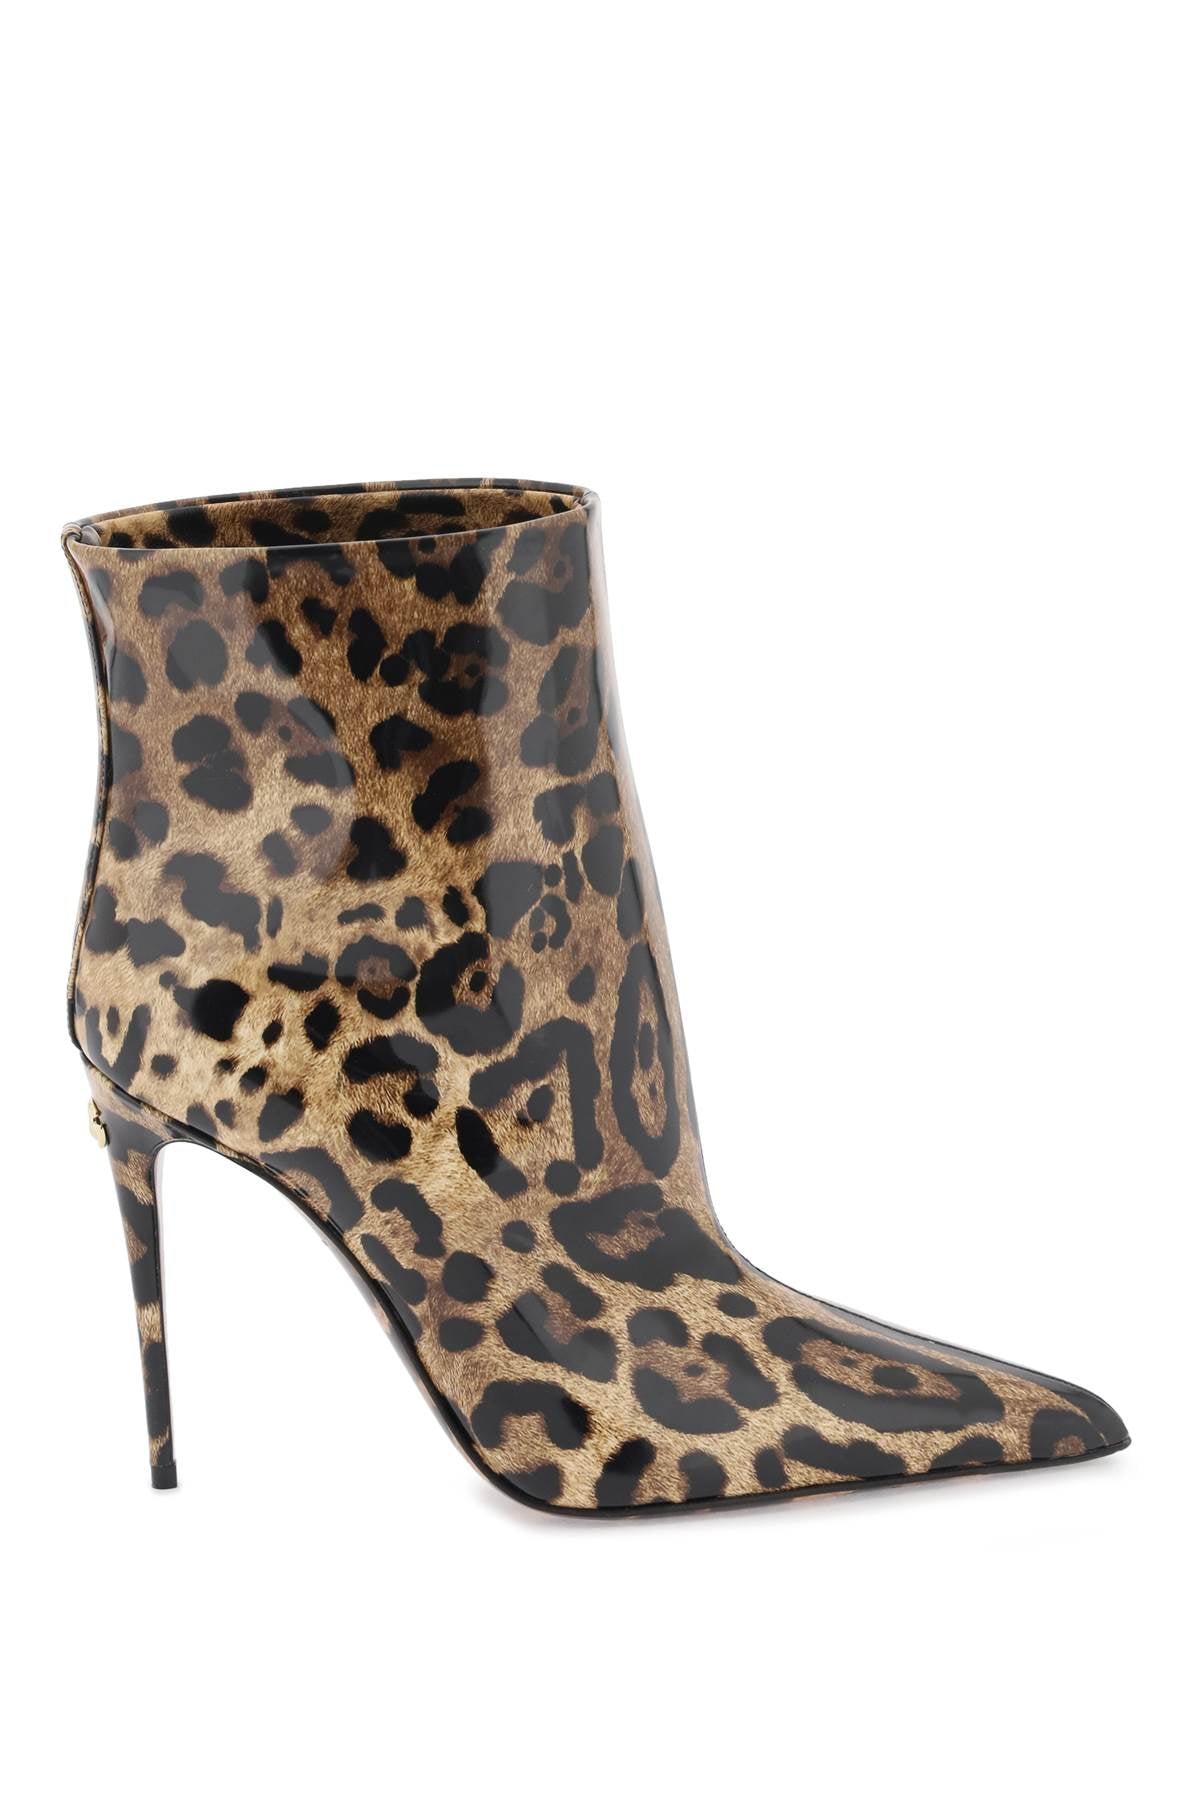 Shop Dolce & Gabbana Leo-print Leather Ankle Boots With Stiletto Heel For Women In Multicolor